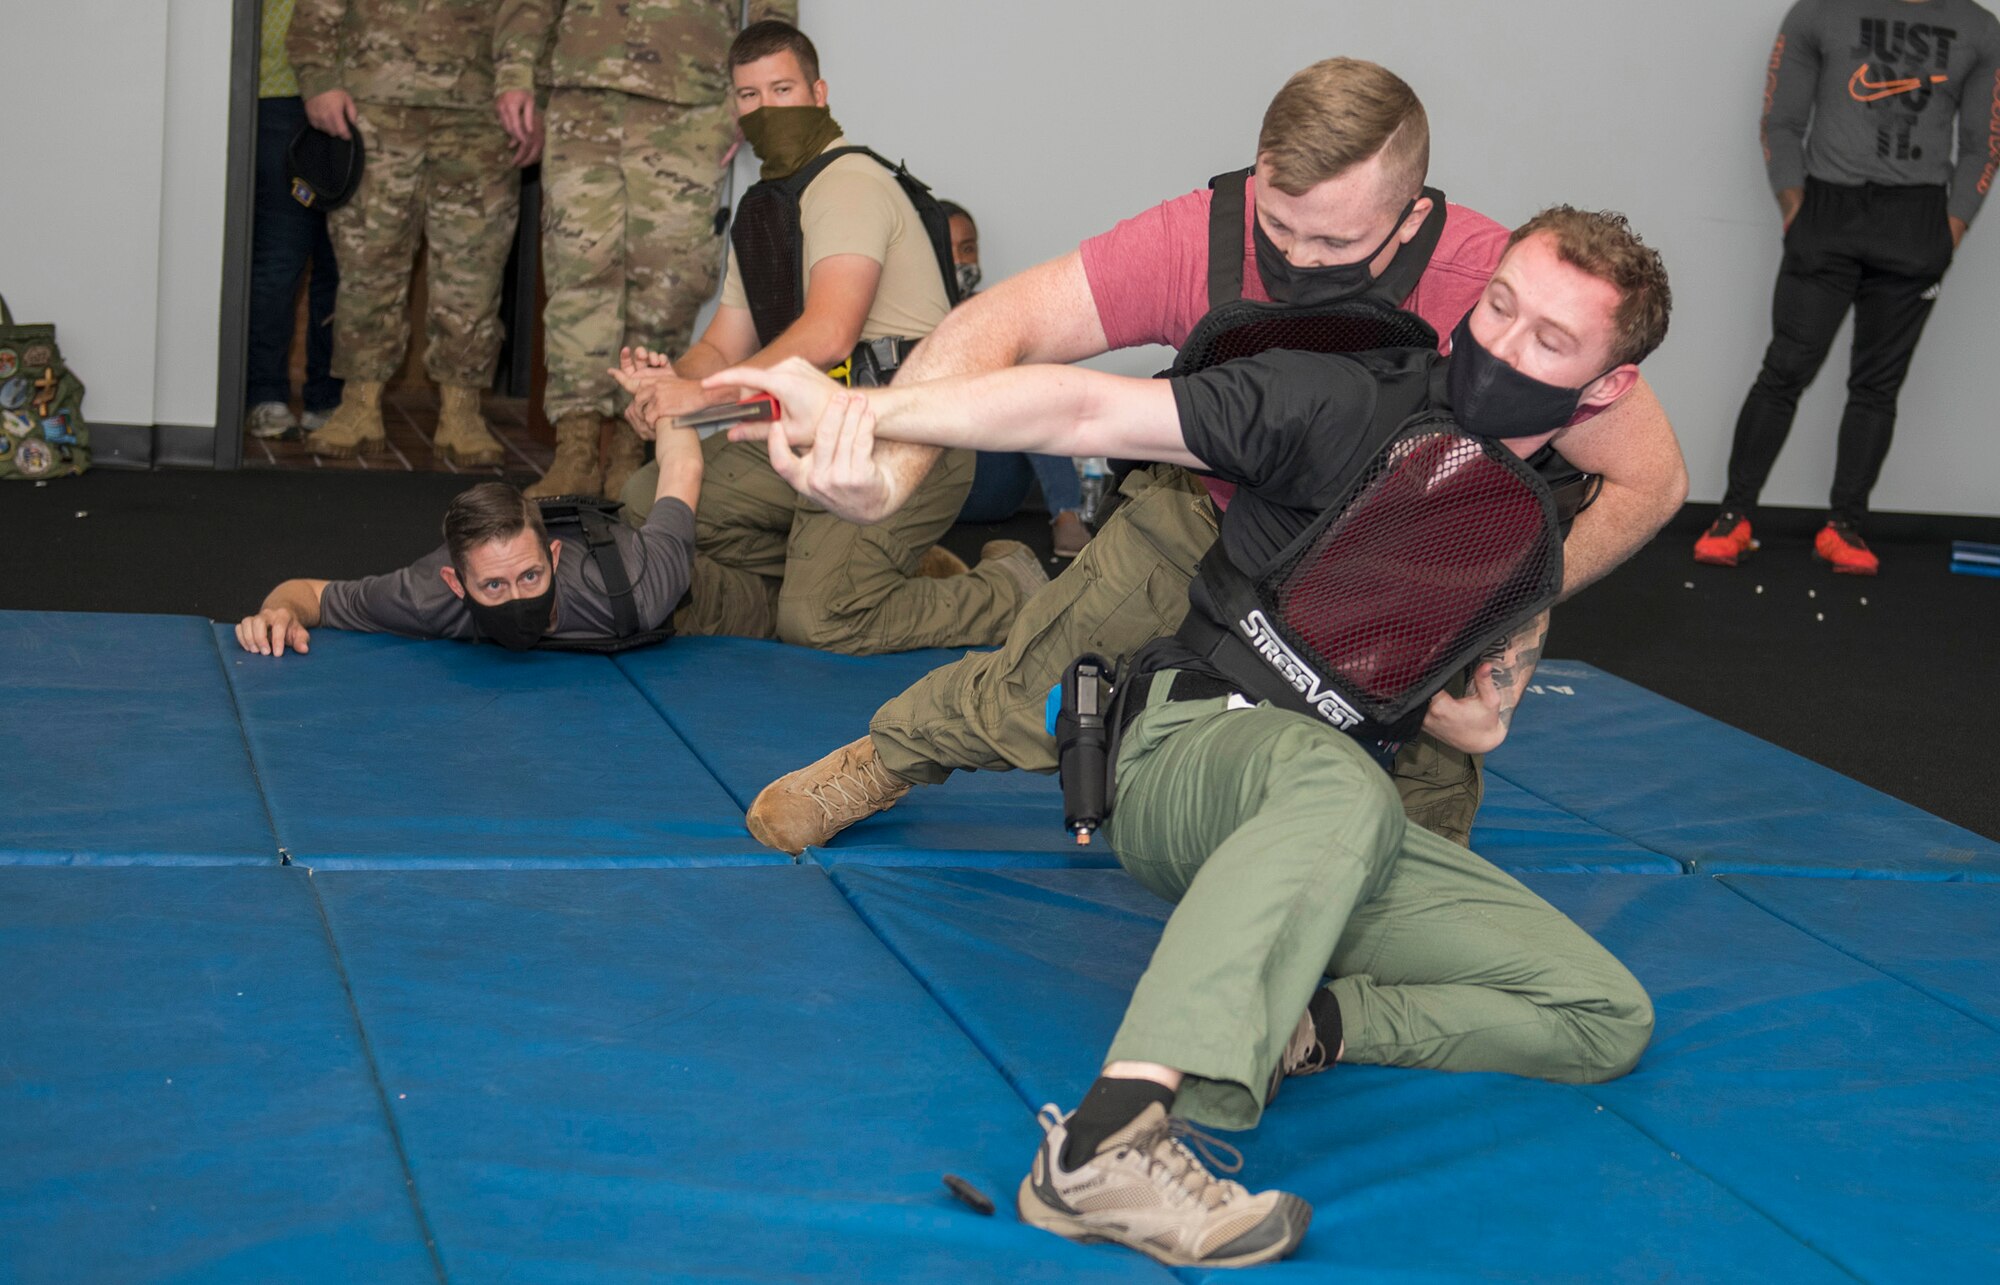 Staff Sgt. Kody Negri, 802d Security Forces Squadron, Staff Sgt. William McLaughlin, 502d SFS, Sgt. Michael Aulner, 502d SFS and Officer Jeremy Quinn, 802d SFS participate in combative training at the Alamo Area Council of Governments, San Antonio, Texas, Oct 22, 2020.